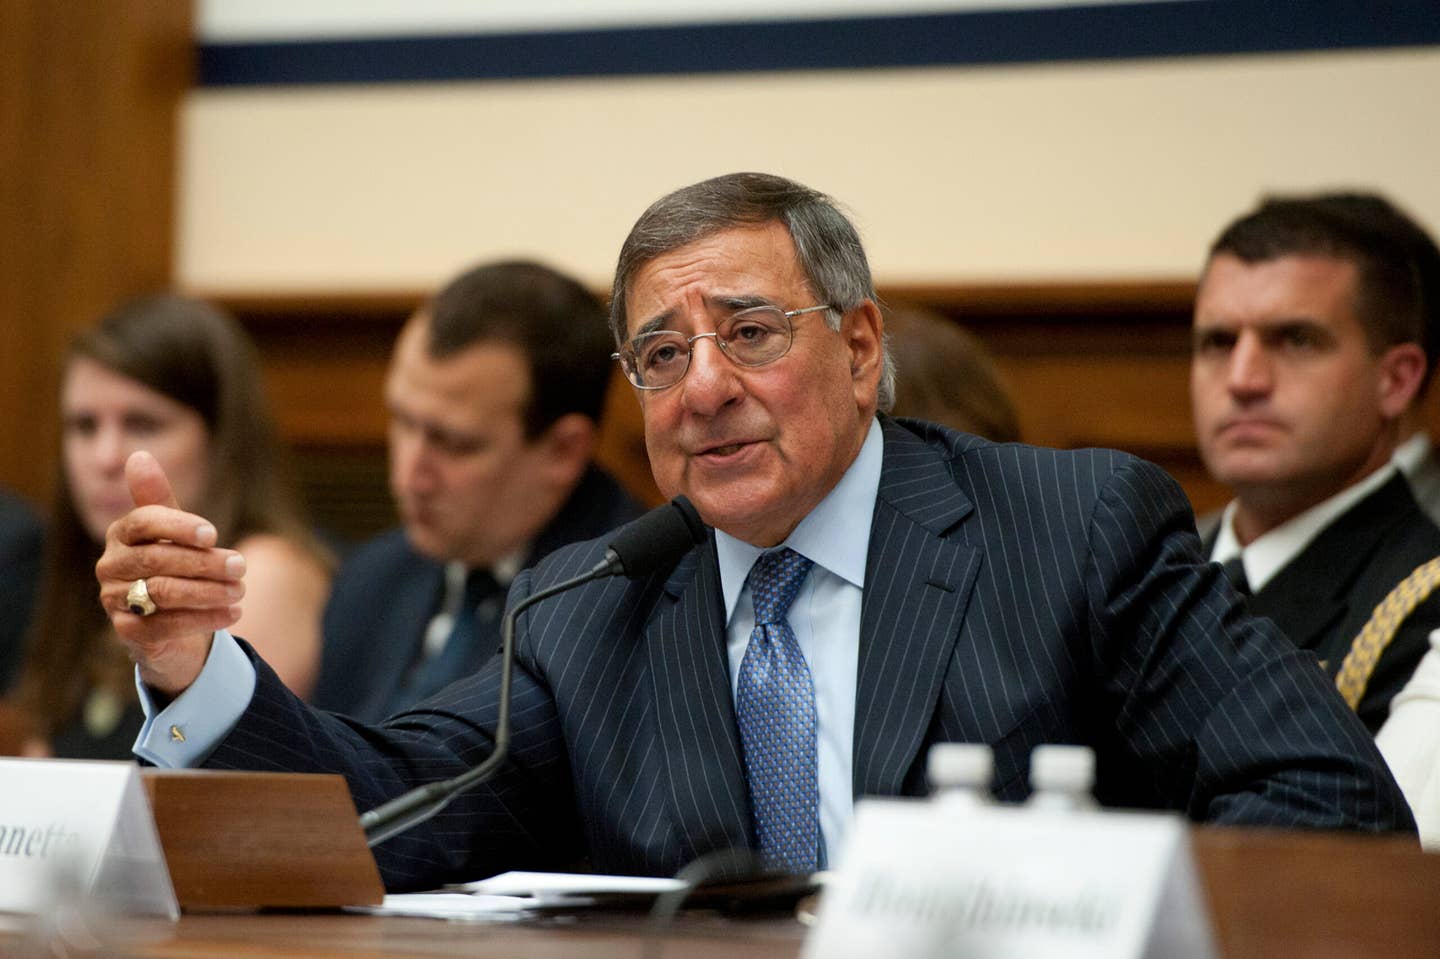 leon panetta figuring out why so many veterans are in prison